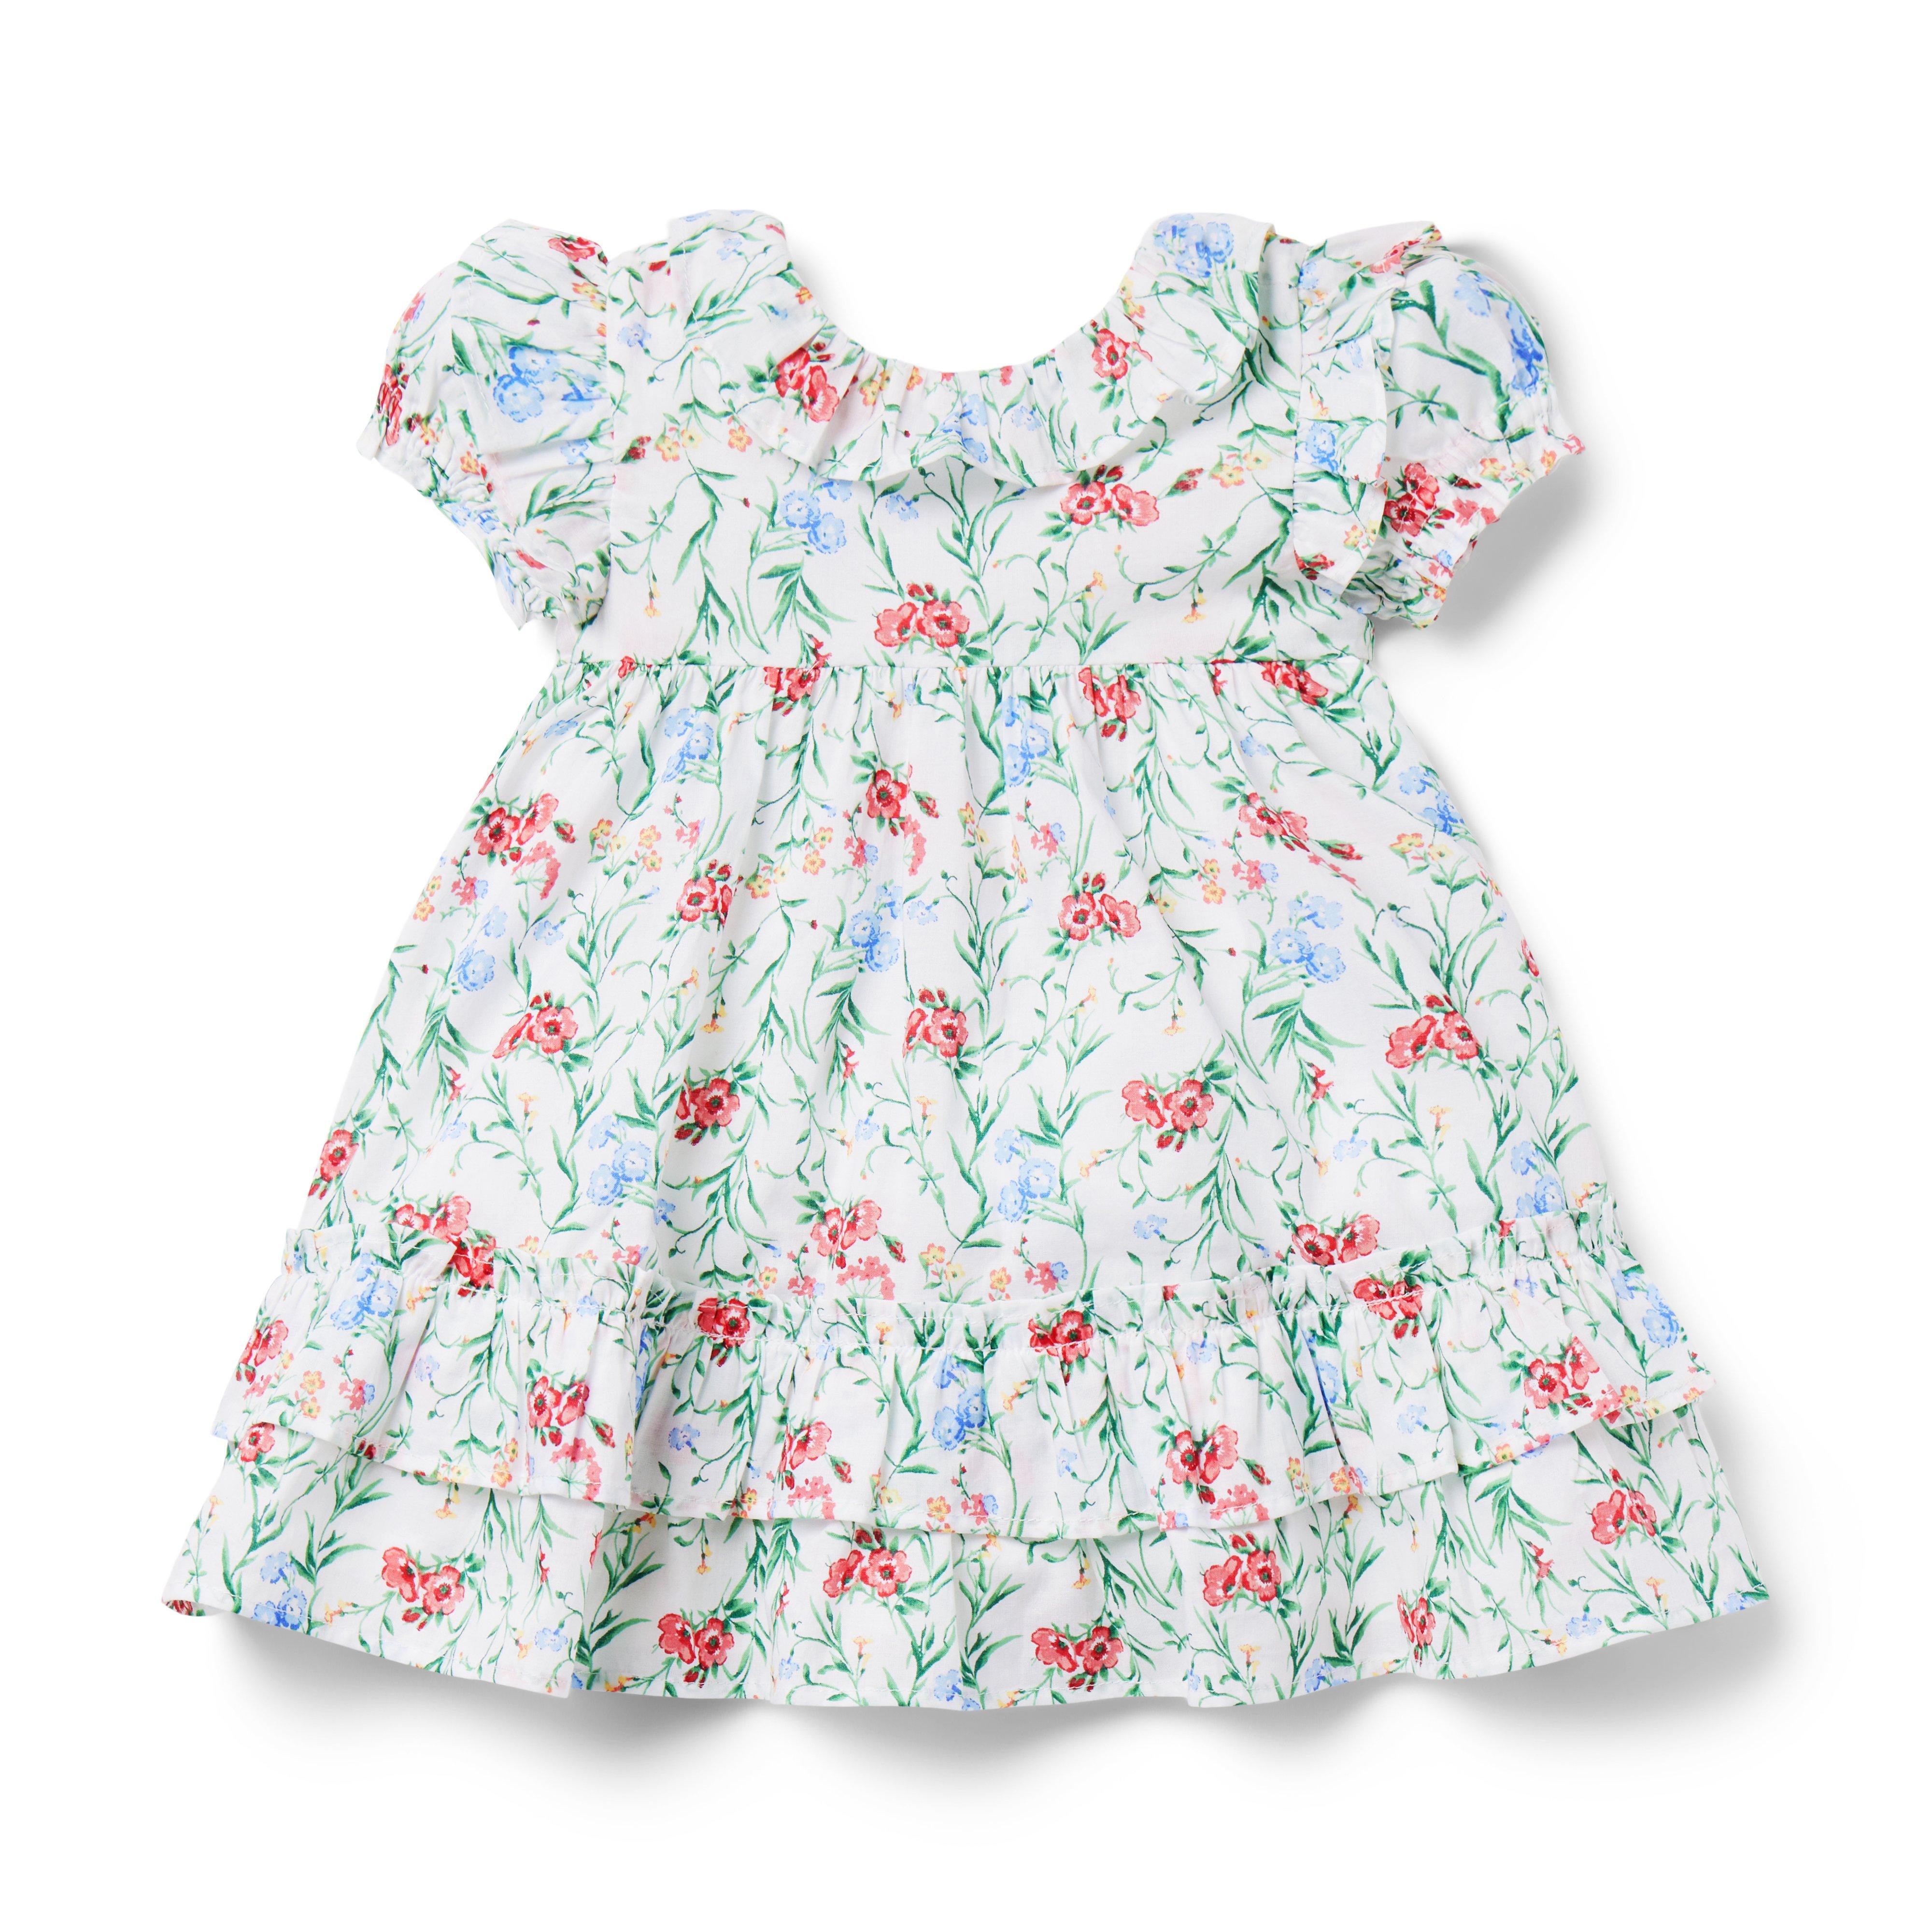 Newborn Baby Girl Dresses & Sets at Janie and Jack